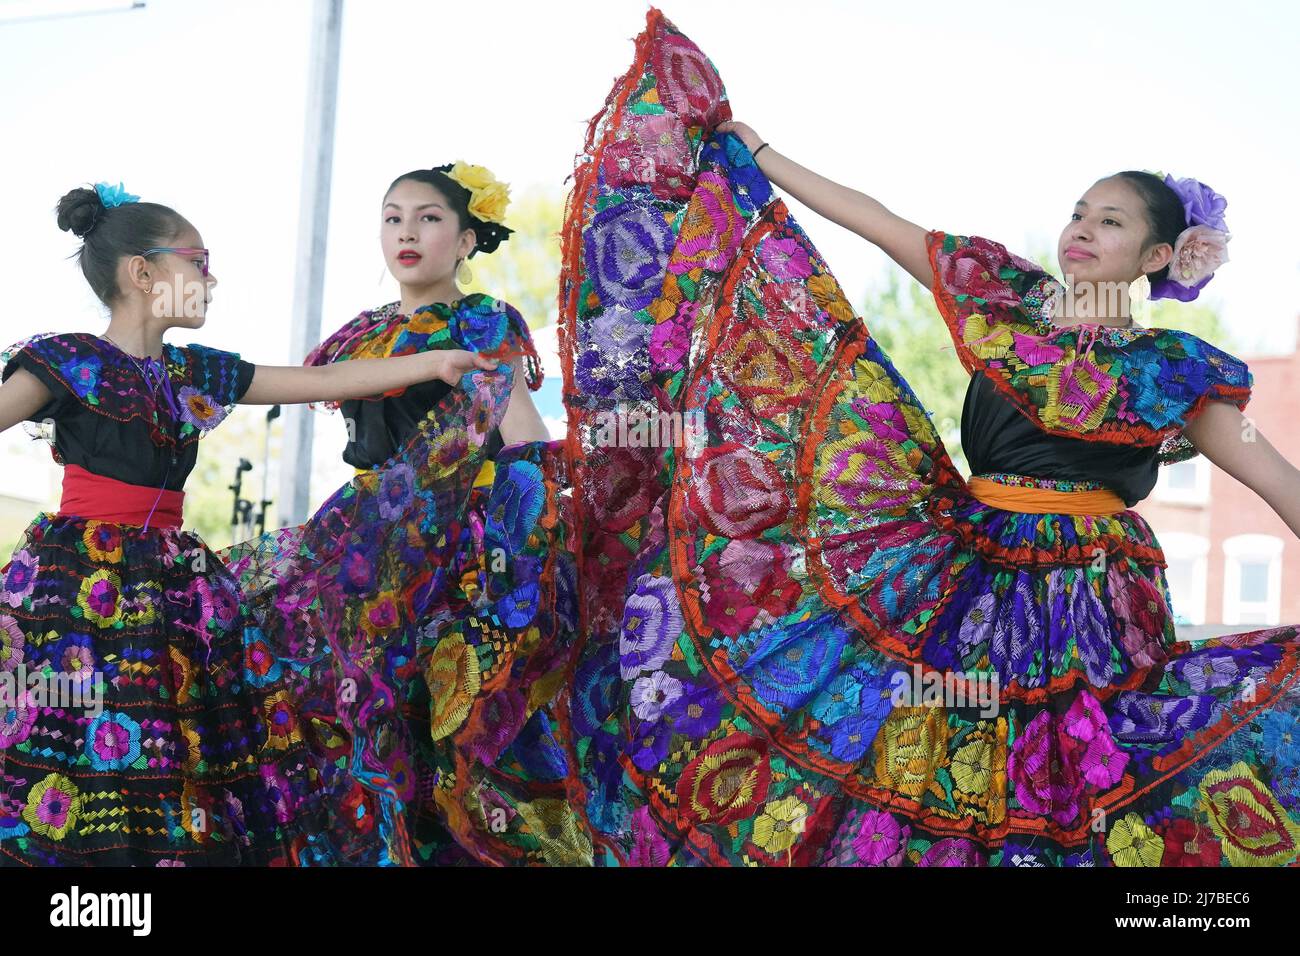 St. Louis, United States. 08th May, 2022. Dancers perform traditional dances in colorful costumes at the Cinco de Mayo celebration in St. Louis on Saturday, May 7, 2022. Photo by Bill Greenblatt/UPI Credit: UPI/Alamy Live News Stock Photo